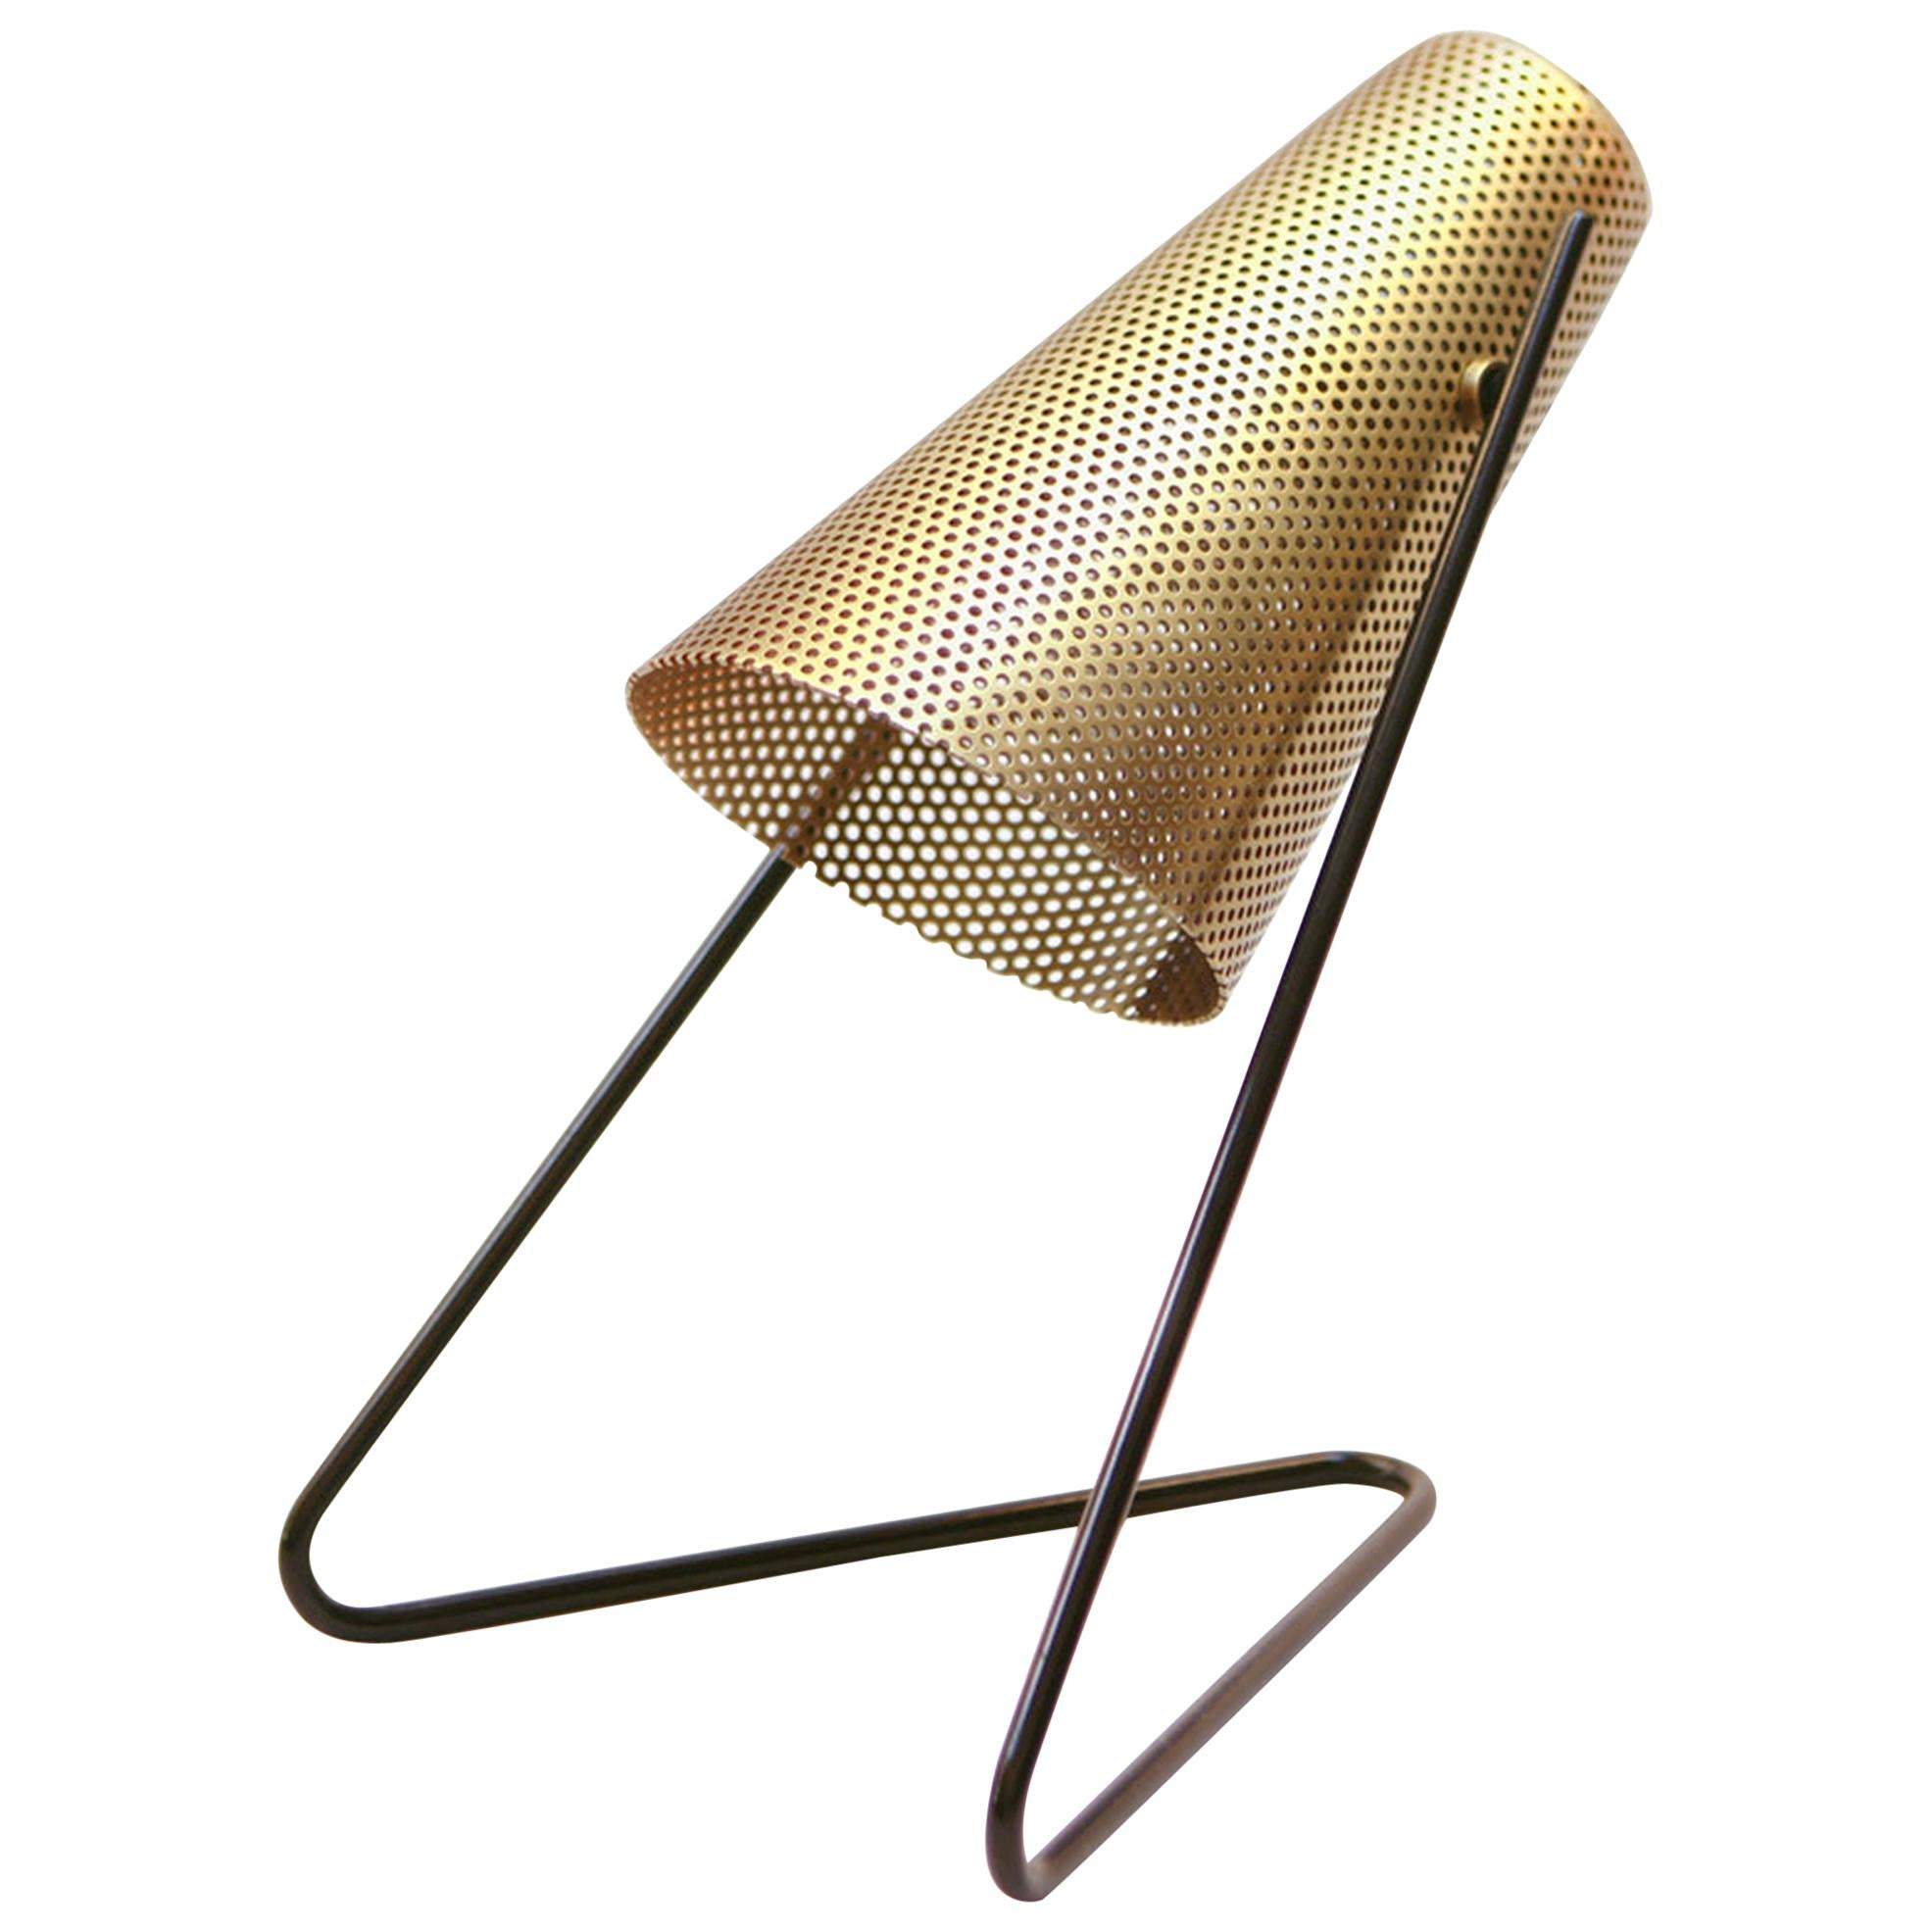 V-Lite-Brass Table Lamp or Wall Sconce with Perforated Shade 